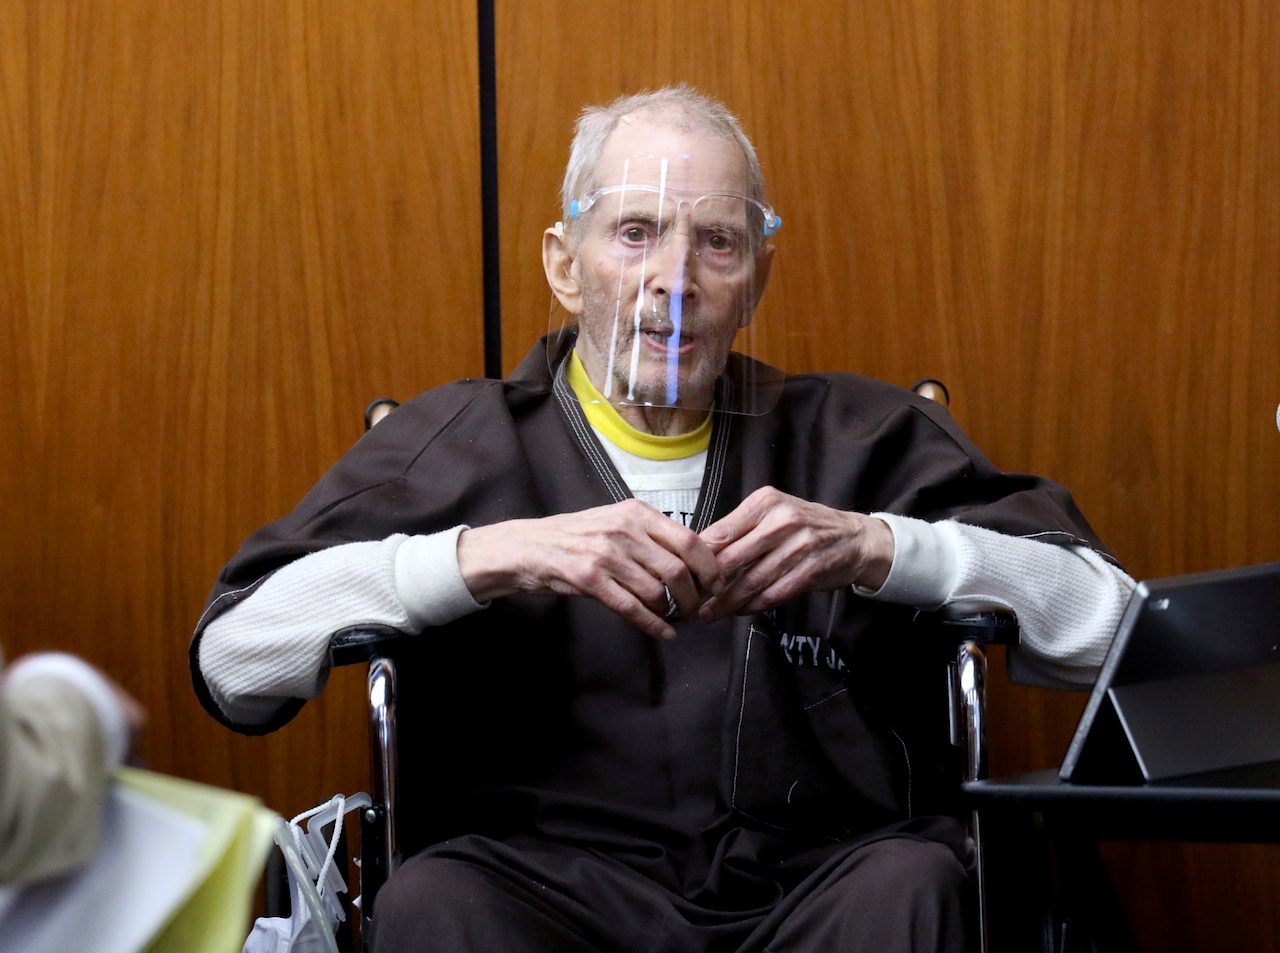 Durst testifies at LA trial to chopping up one body, abandoning another